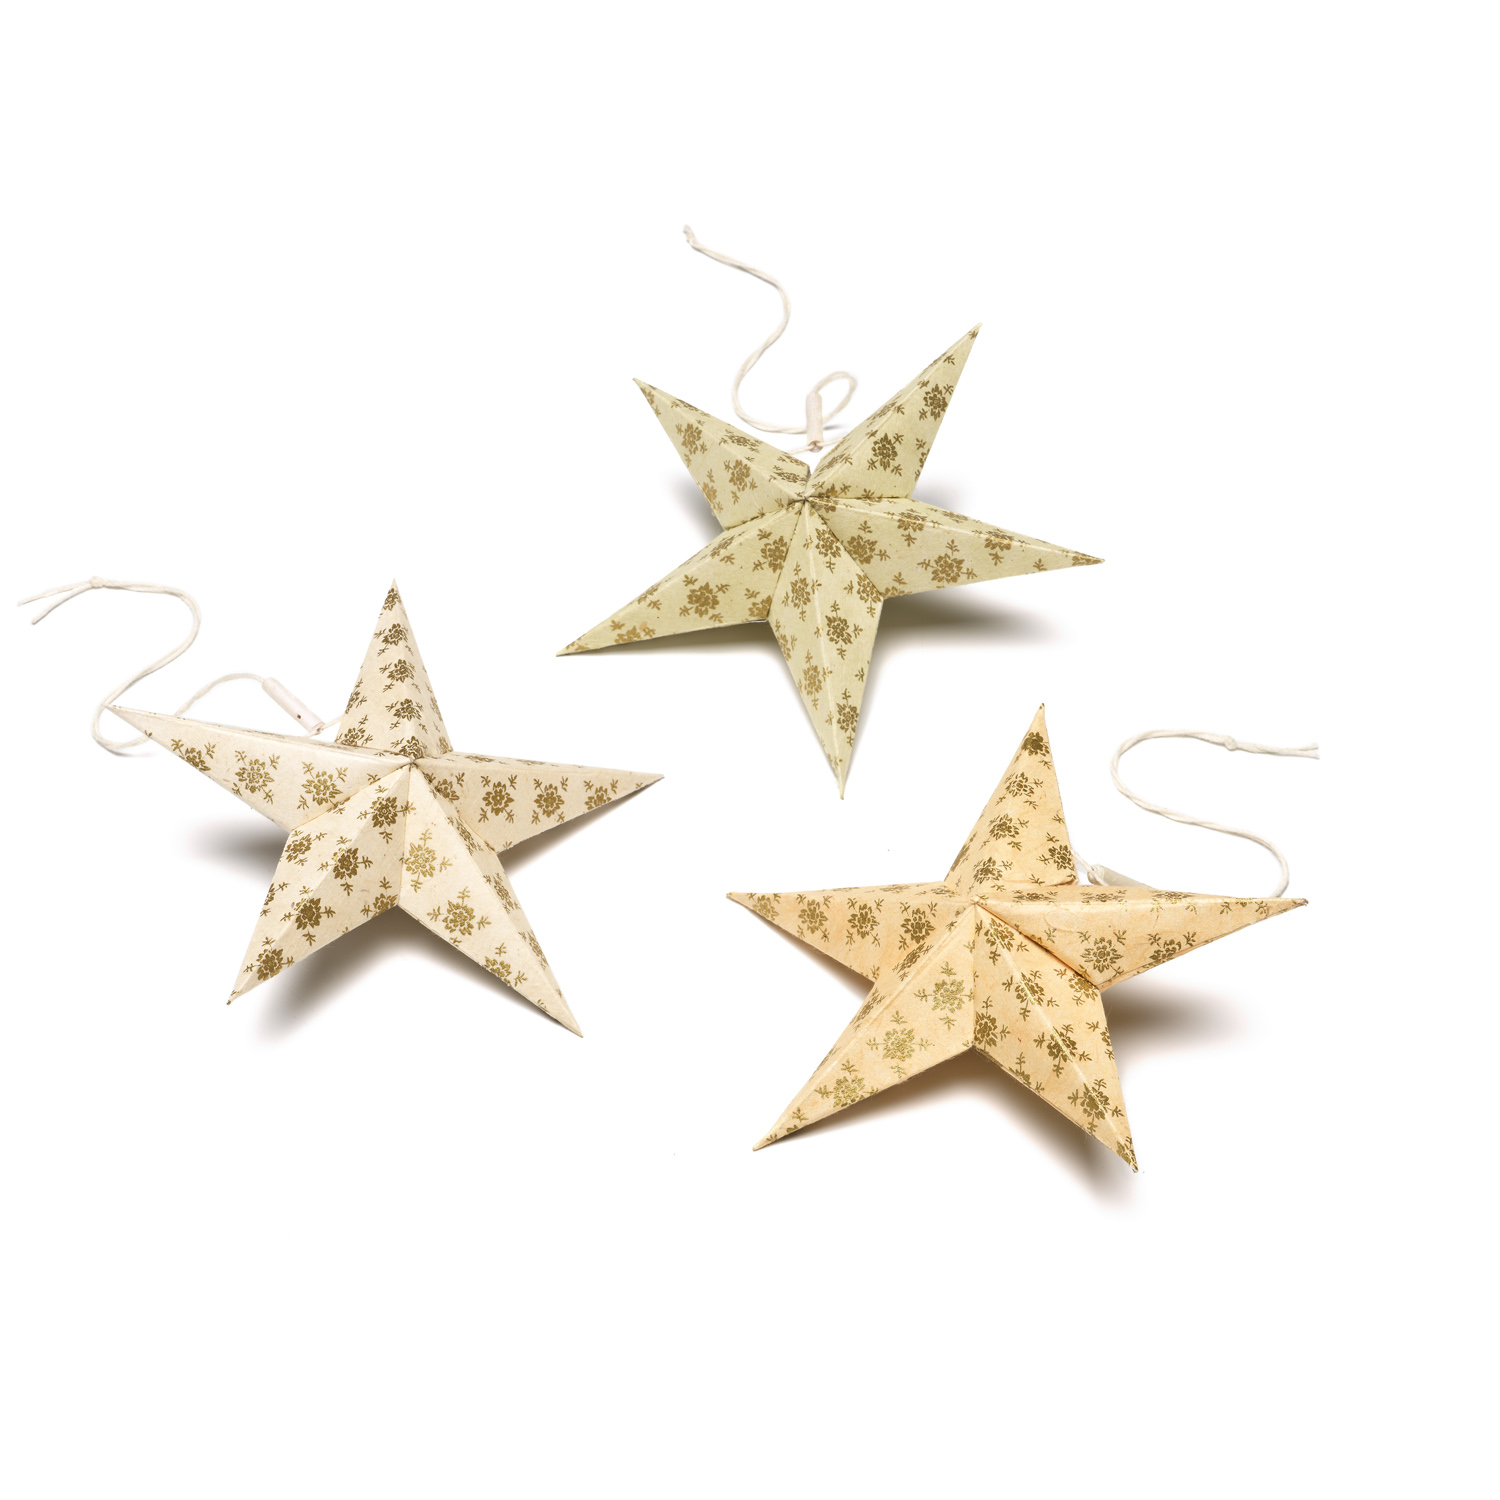 Star | Small | 5 pieces